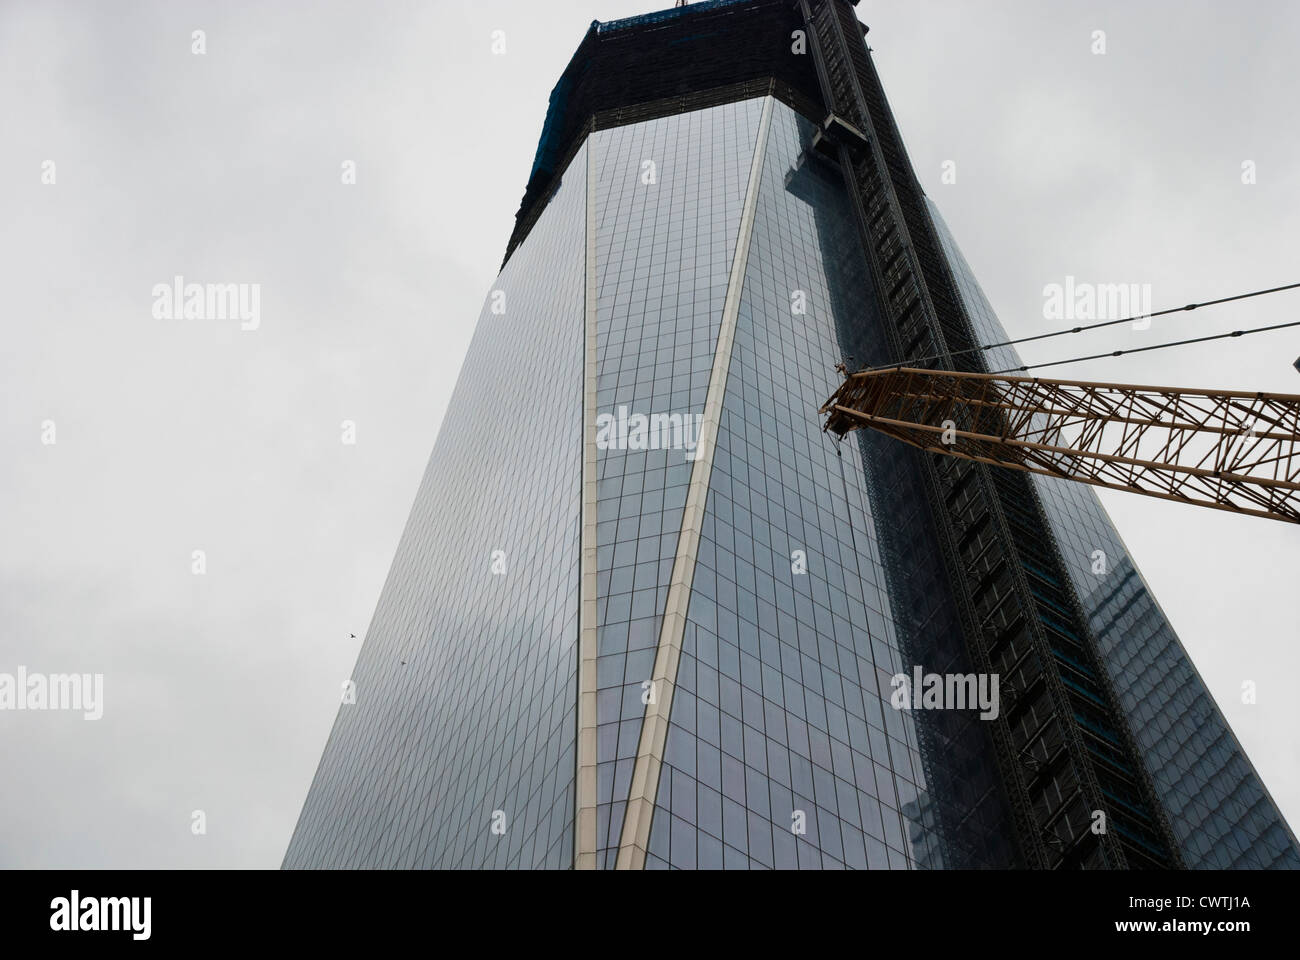 One World Trade Center, known as the Freedom Tower or 1 WTC, under construction with crane, New York City, USA Stock Photo